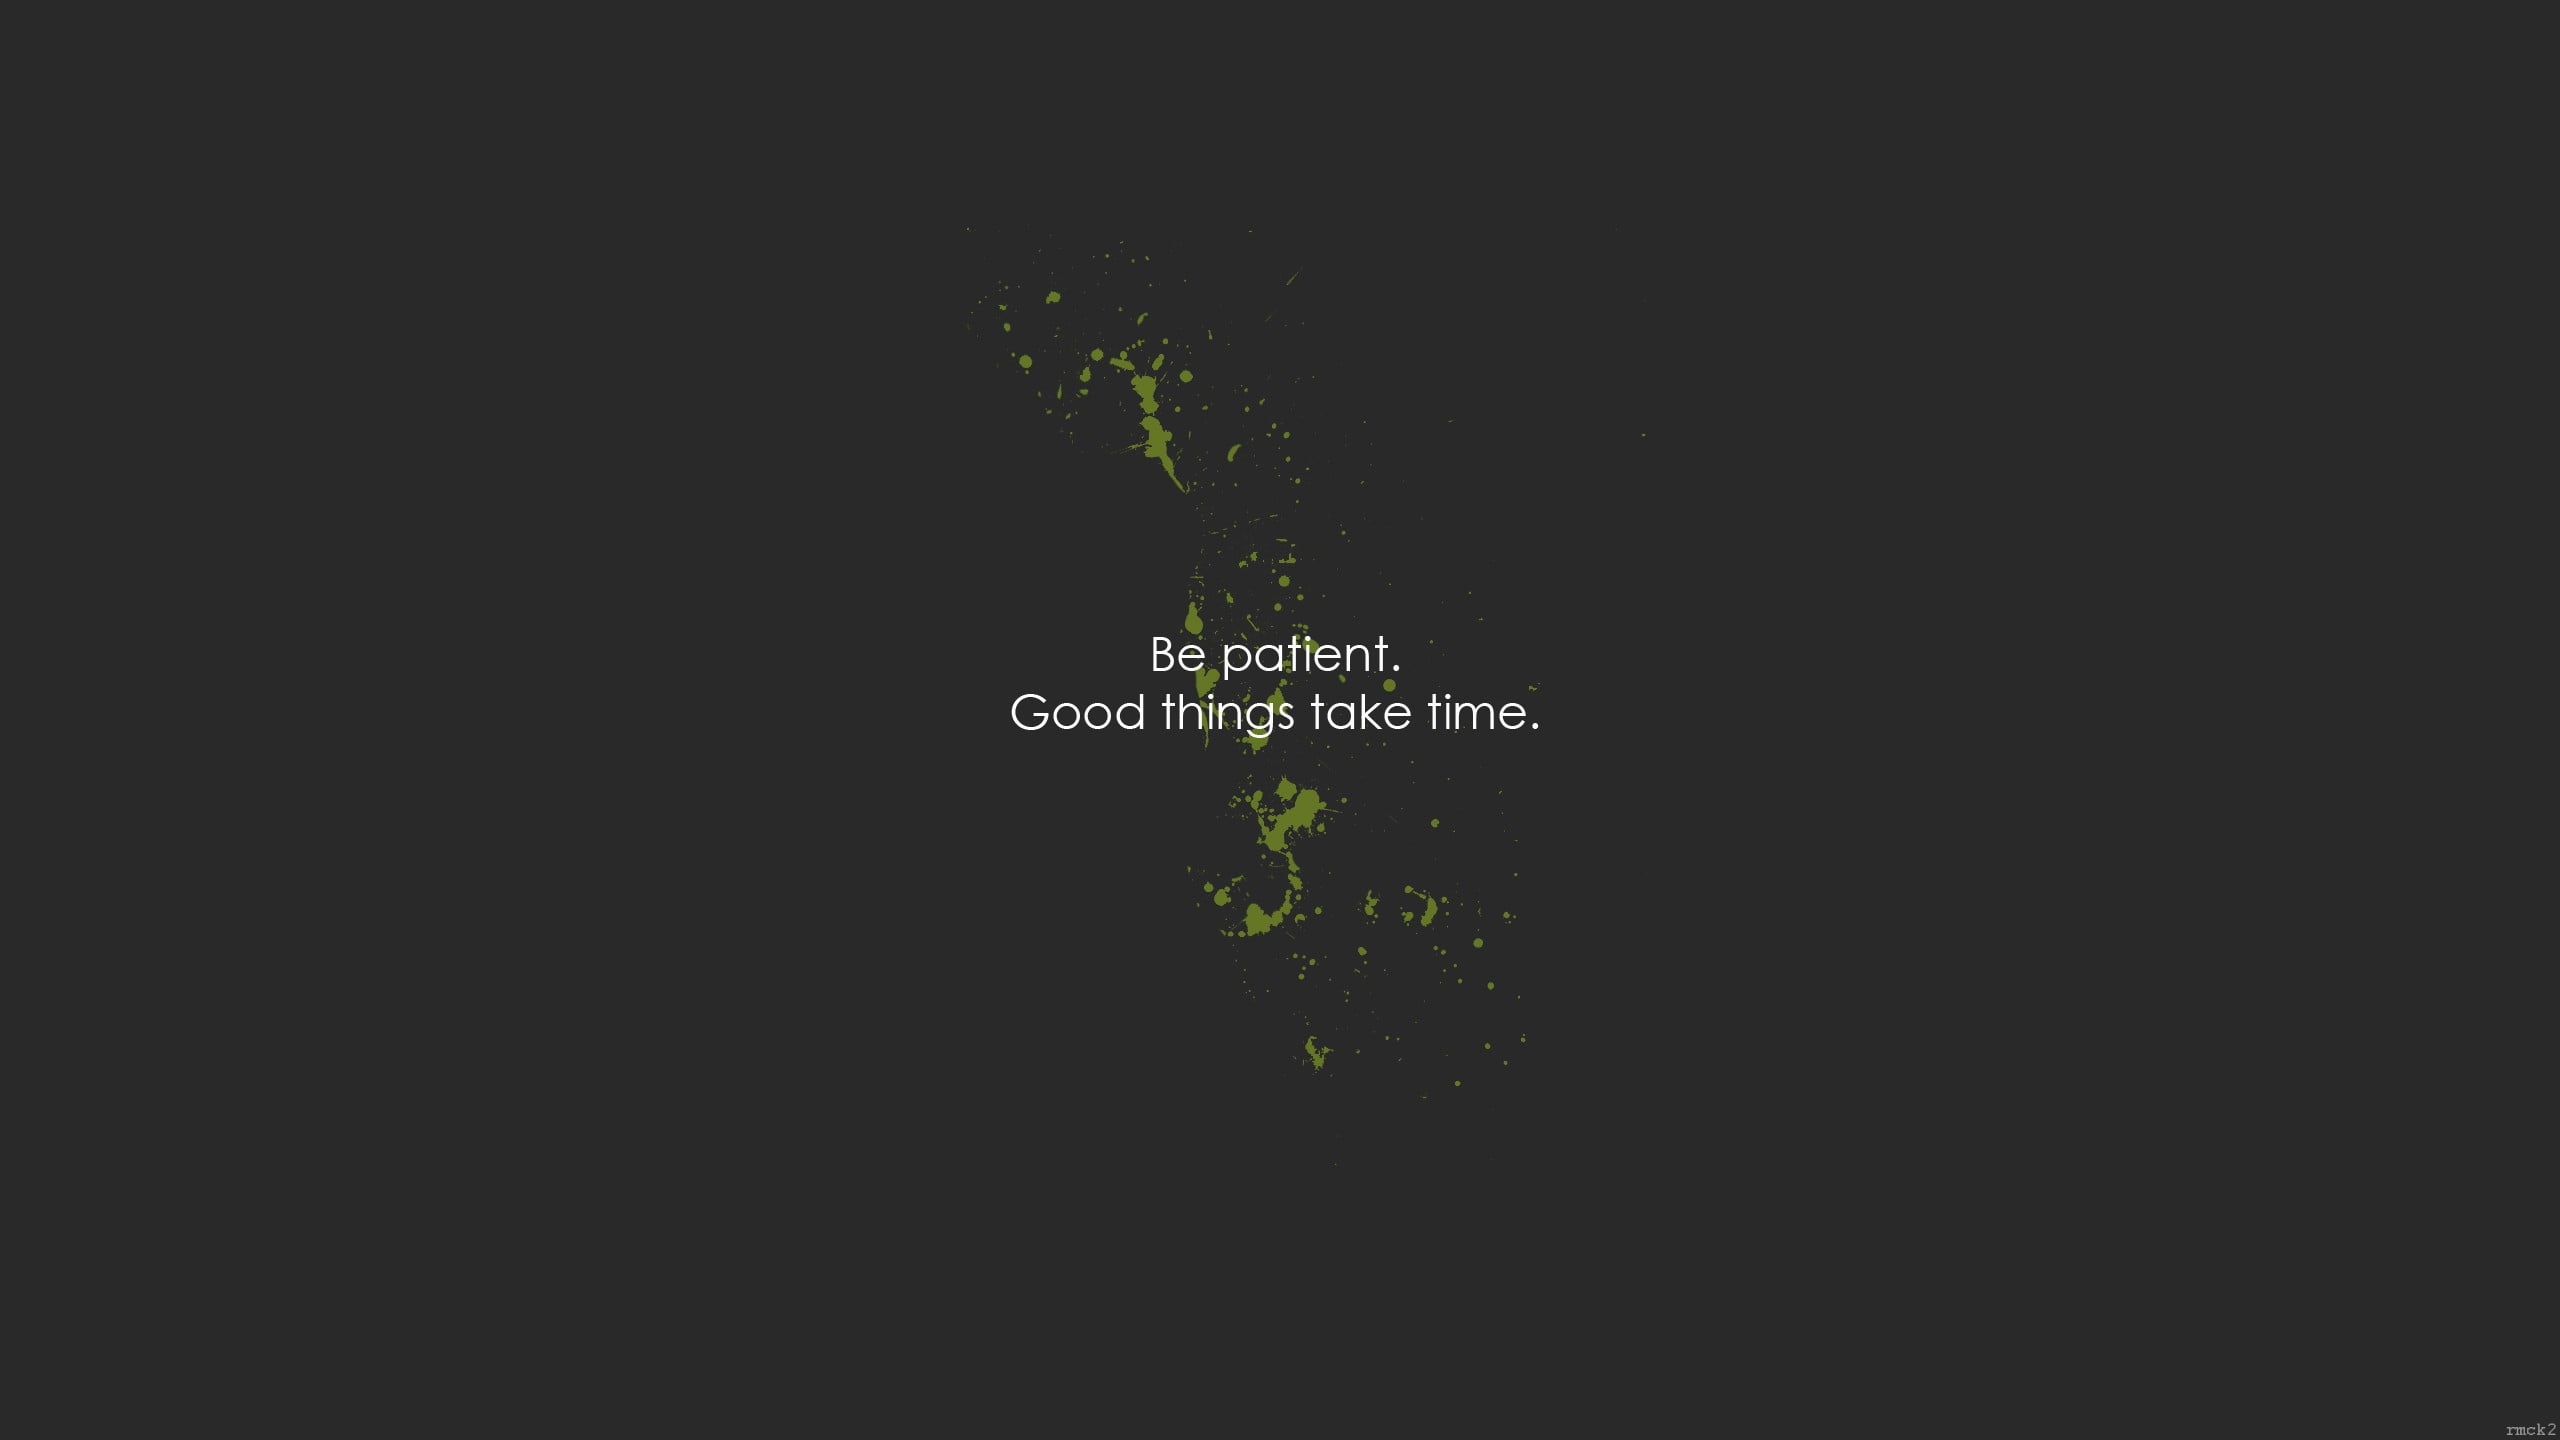 Be patient good things take time wallpaper, quote, Book quotes, western script